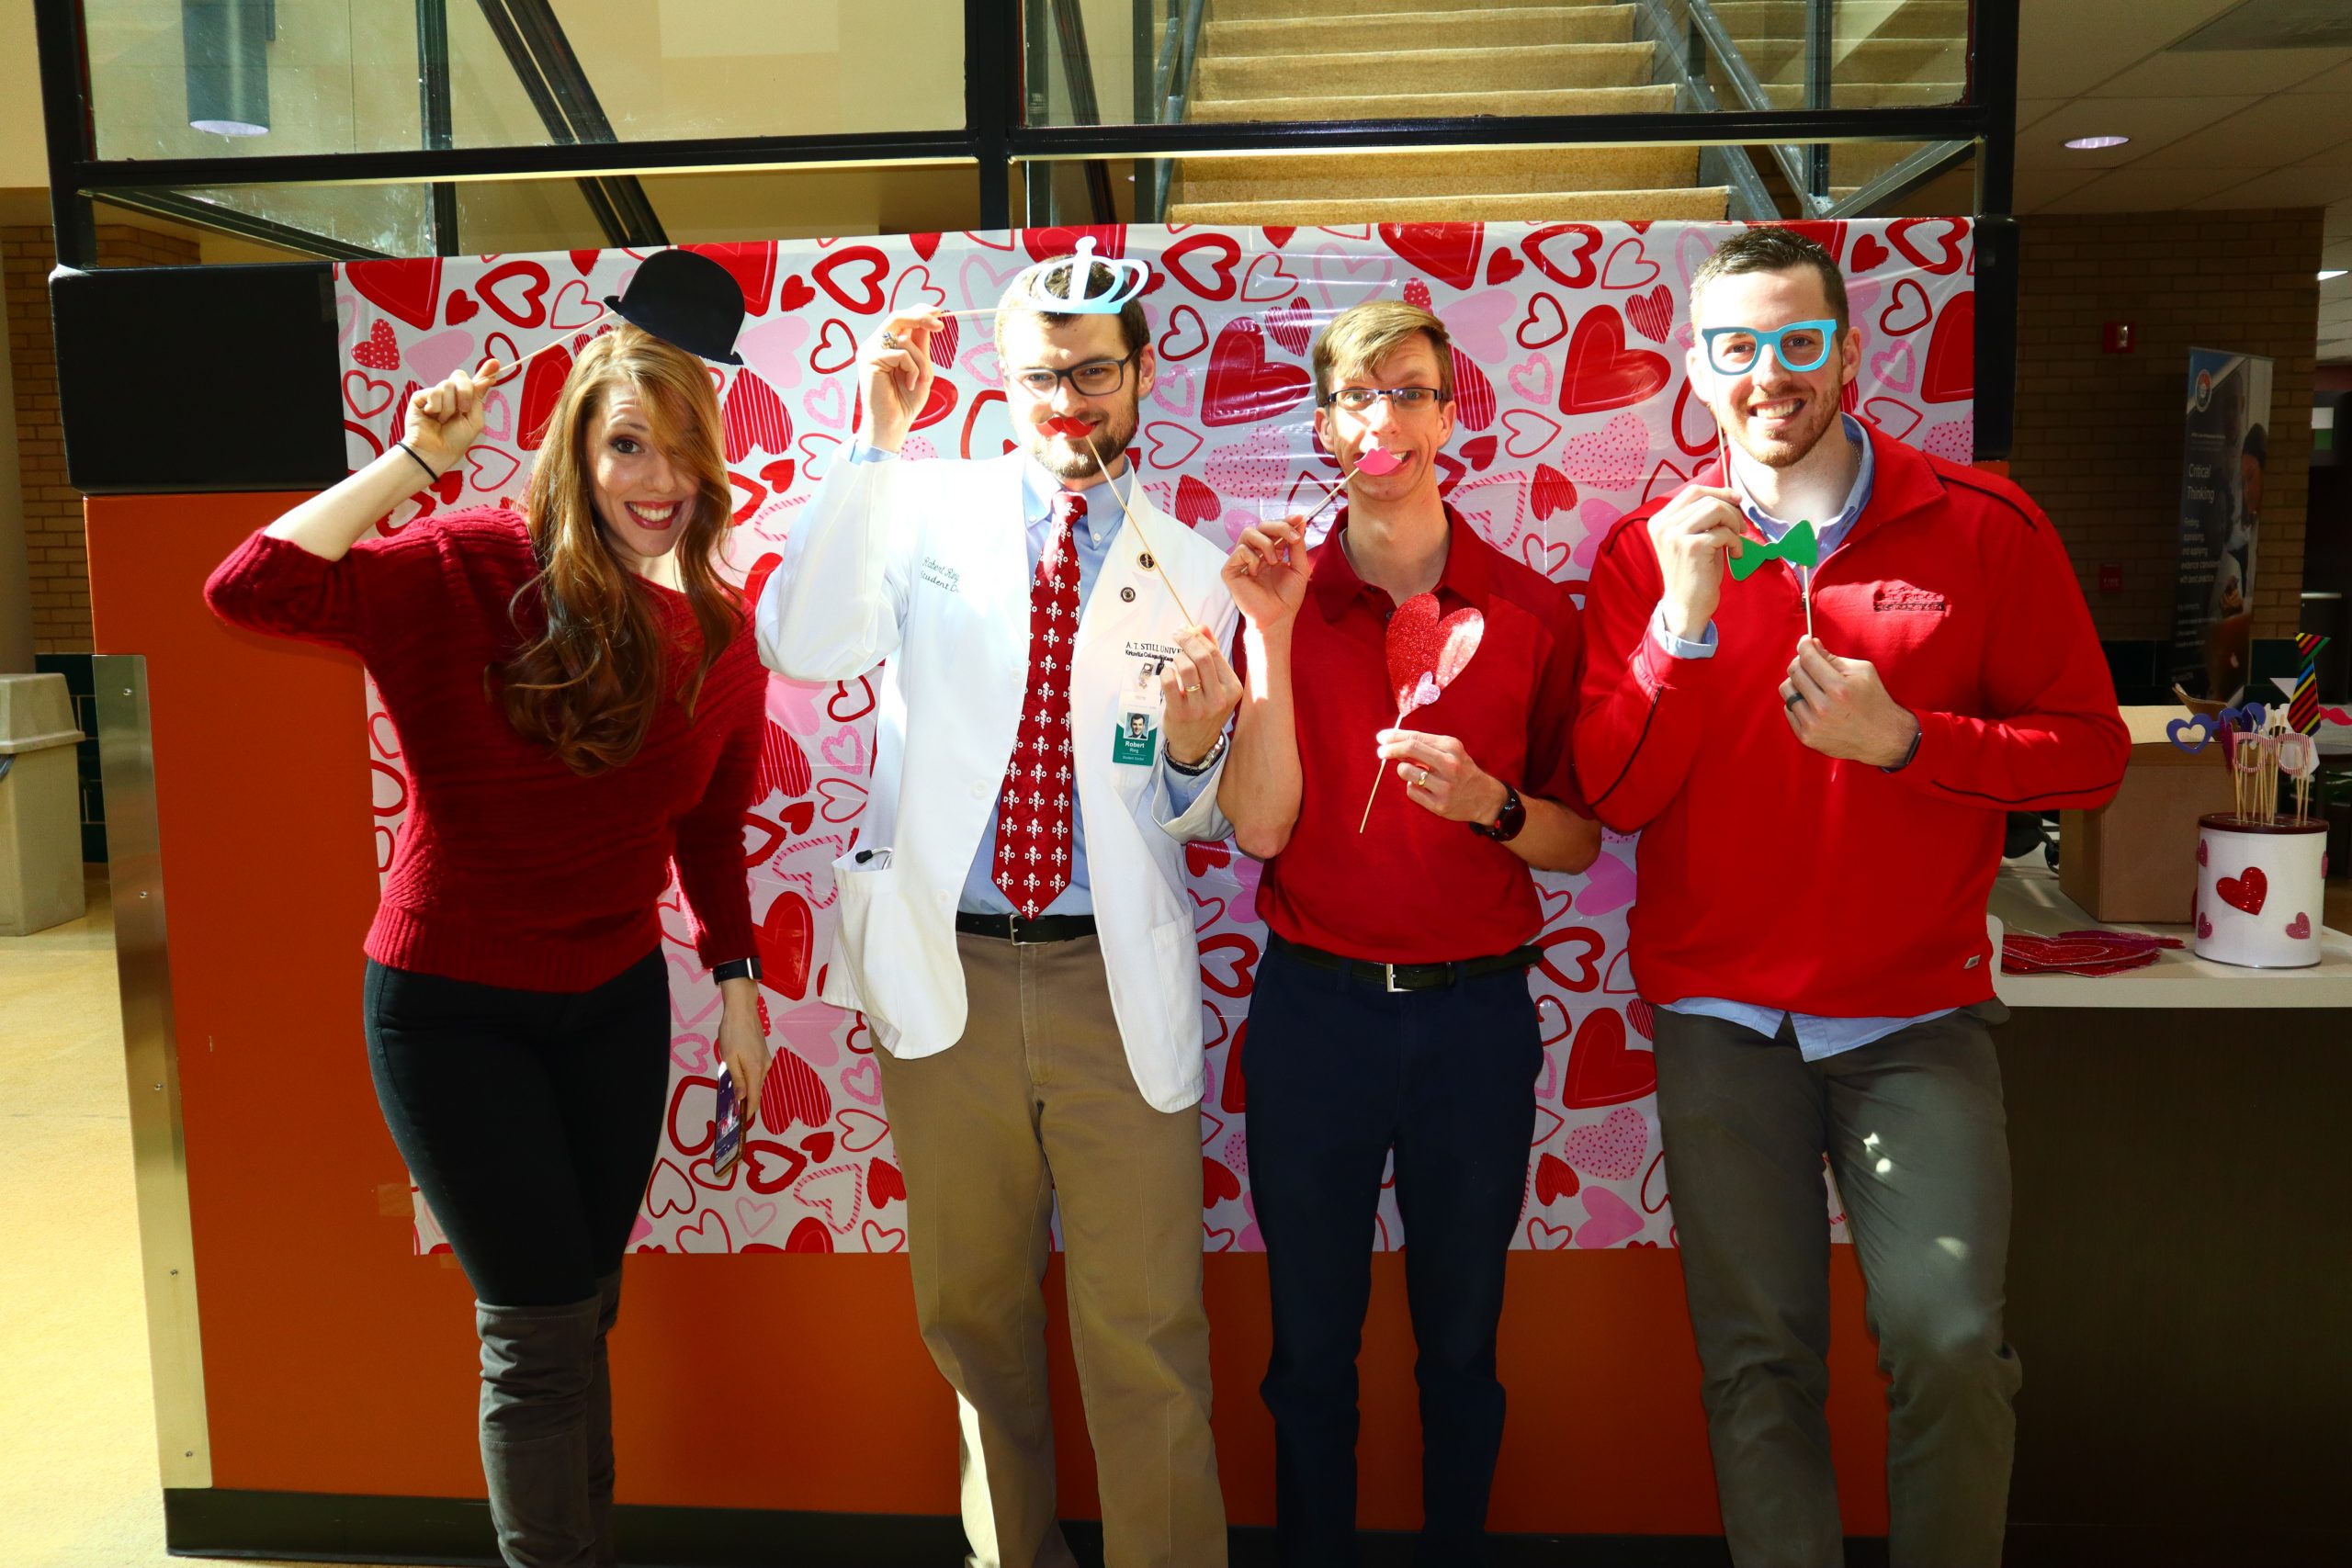 Students dressed in red in with photo booth props